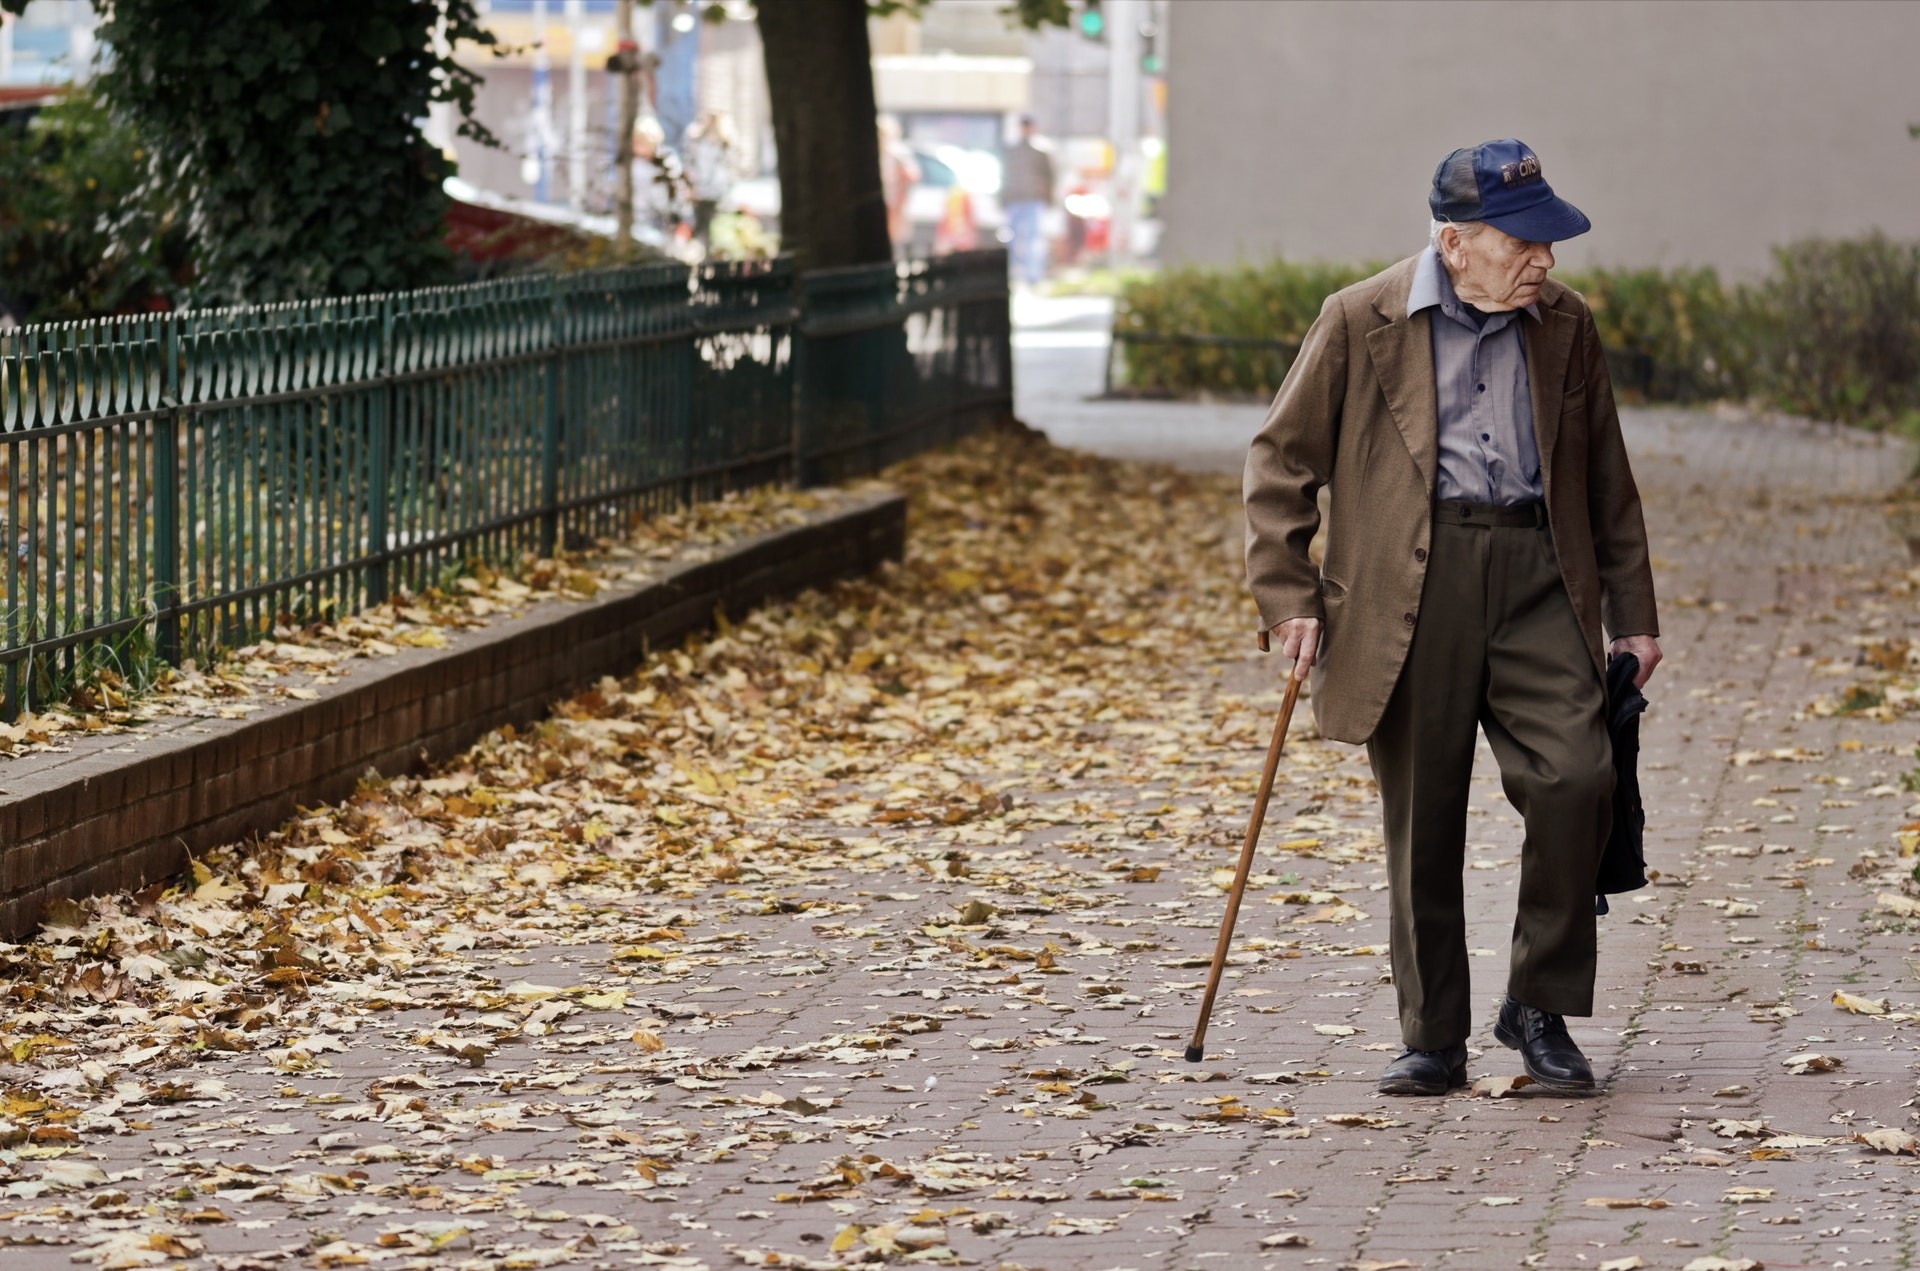 The challenge of redesigning cities to adapt to an ageing population